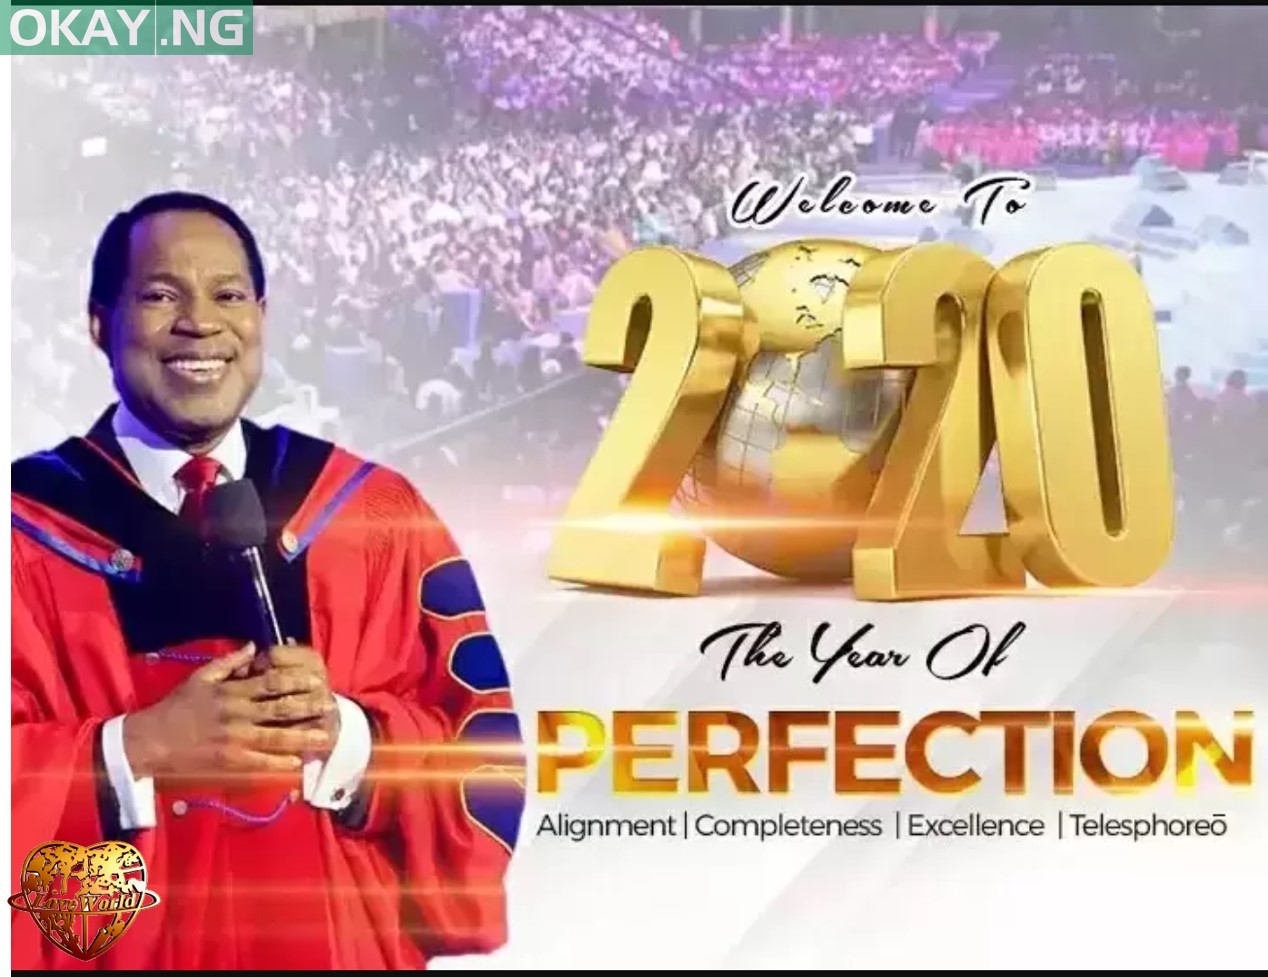 In illuminating the idea of perfection Pastor Chris Oyakhilome has sown inspired leadership